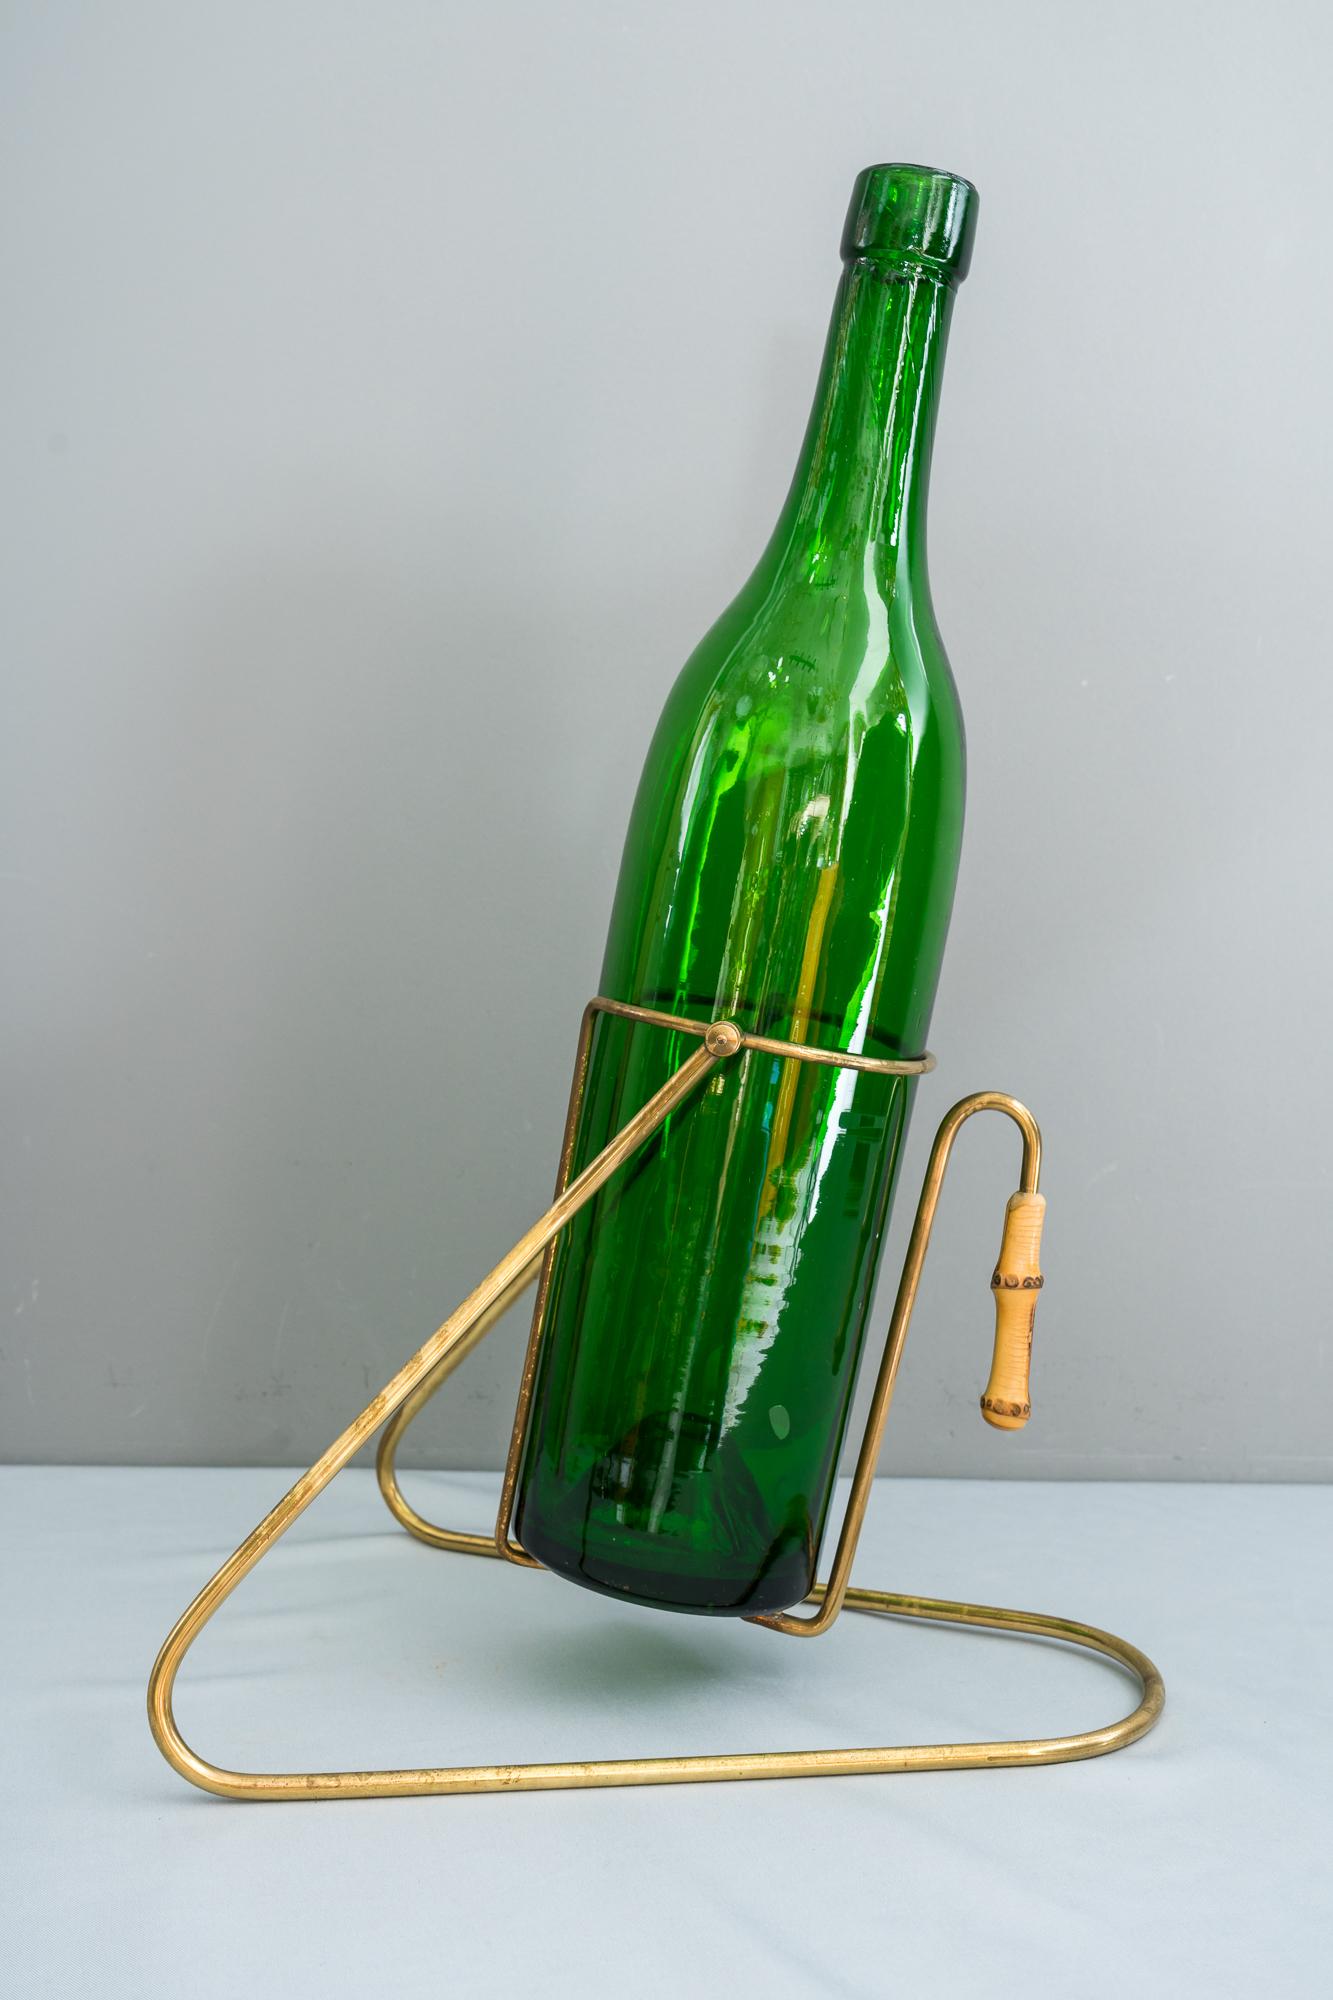 Bottle holder for big 3 liter wine bottles, Vienna, 1950s
Brass and bamboo combination
Rare model
Attributed to Auböck
Original condition
The bottle is only for the photoshooting it is not included.
The hole for the bottle is: 11.5cm.